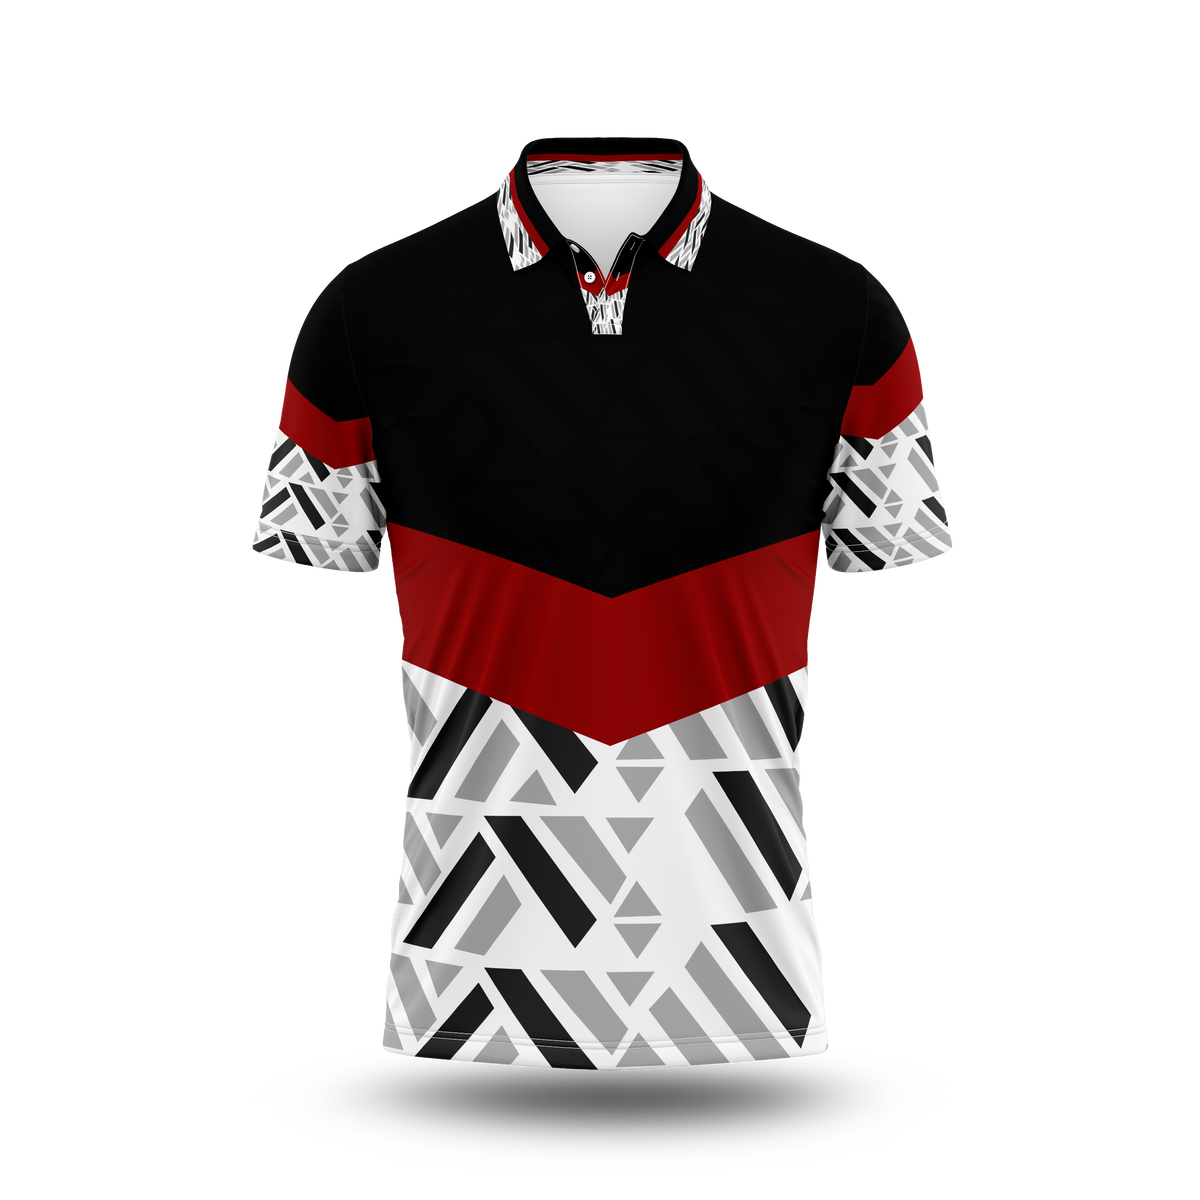 All Over Printed Jersey With Name And Number Printed.NP0040